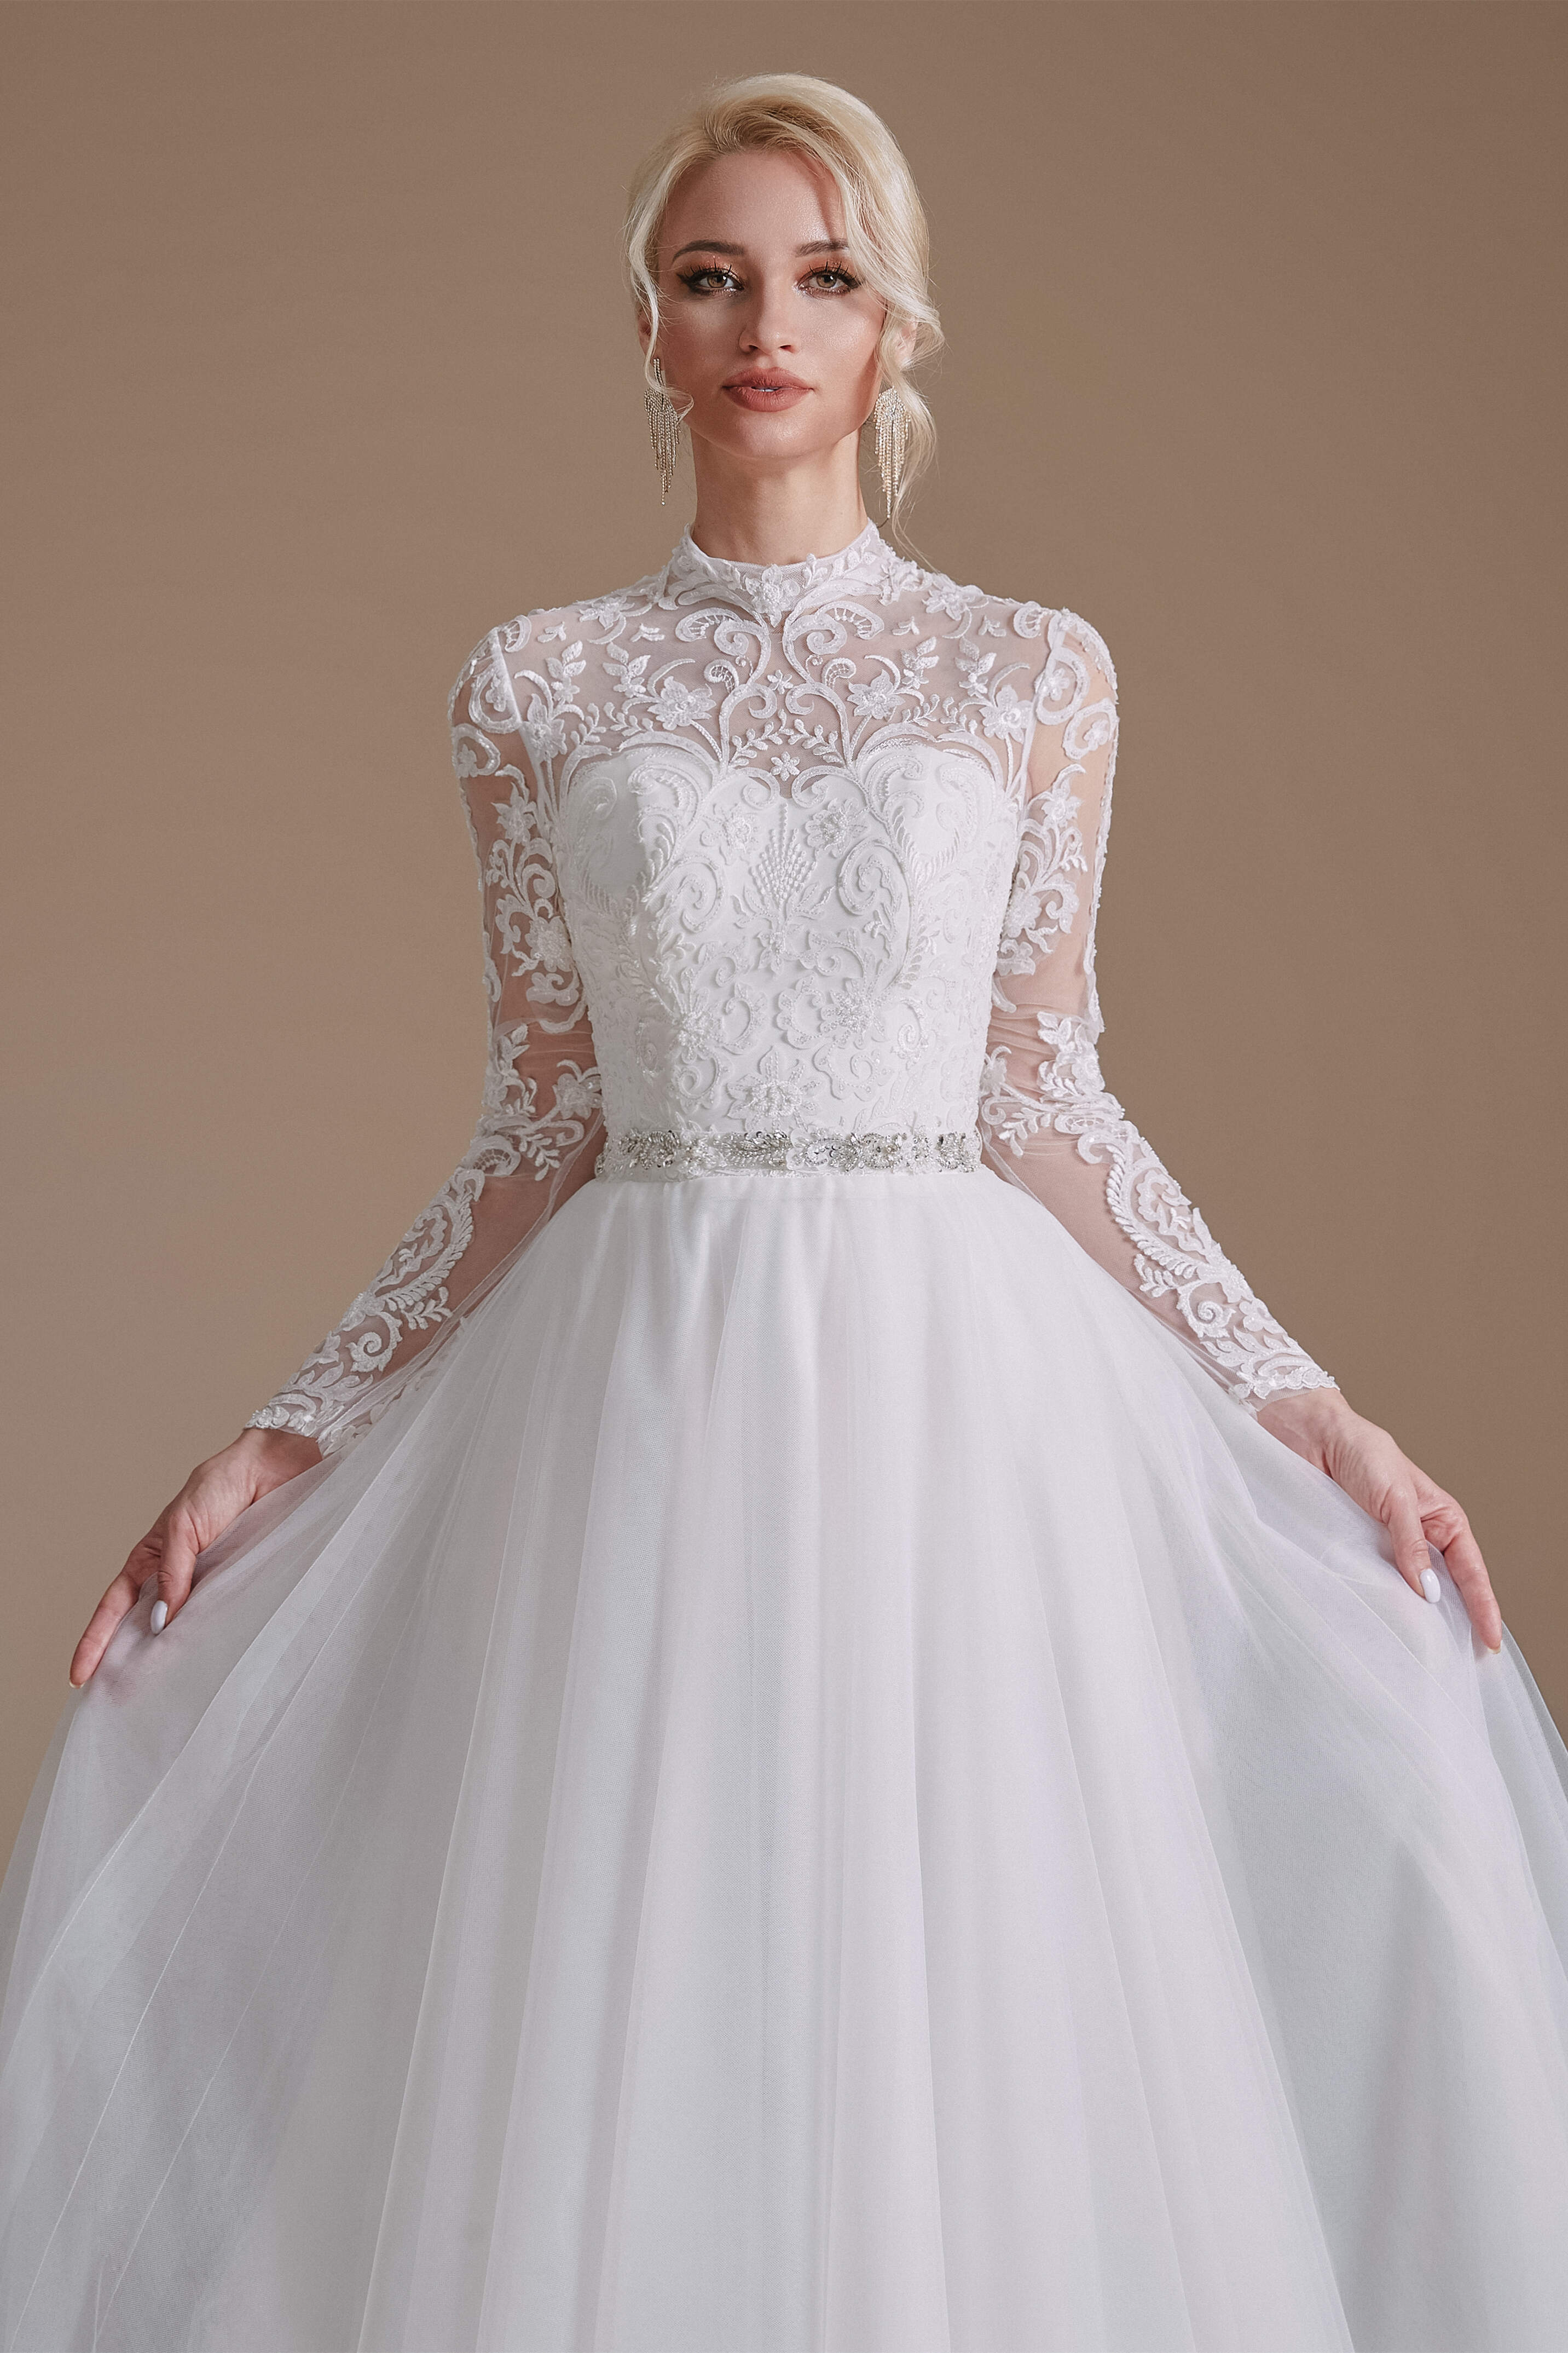 Long Sleeves High Neck with Tulle Train Full A-Line Corset Wedding Dresses outfit, Wedding Dress Casual